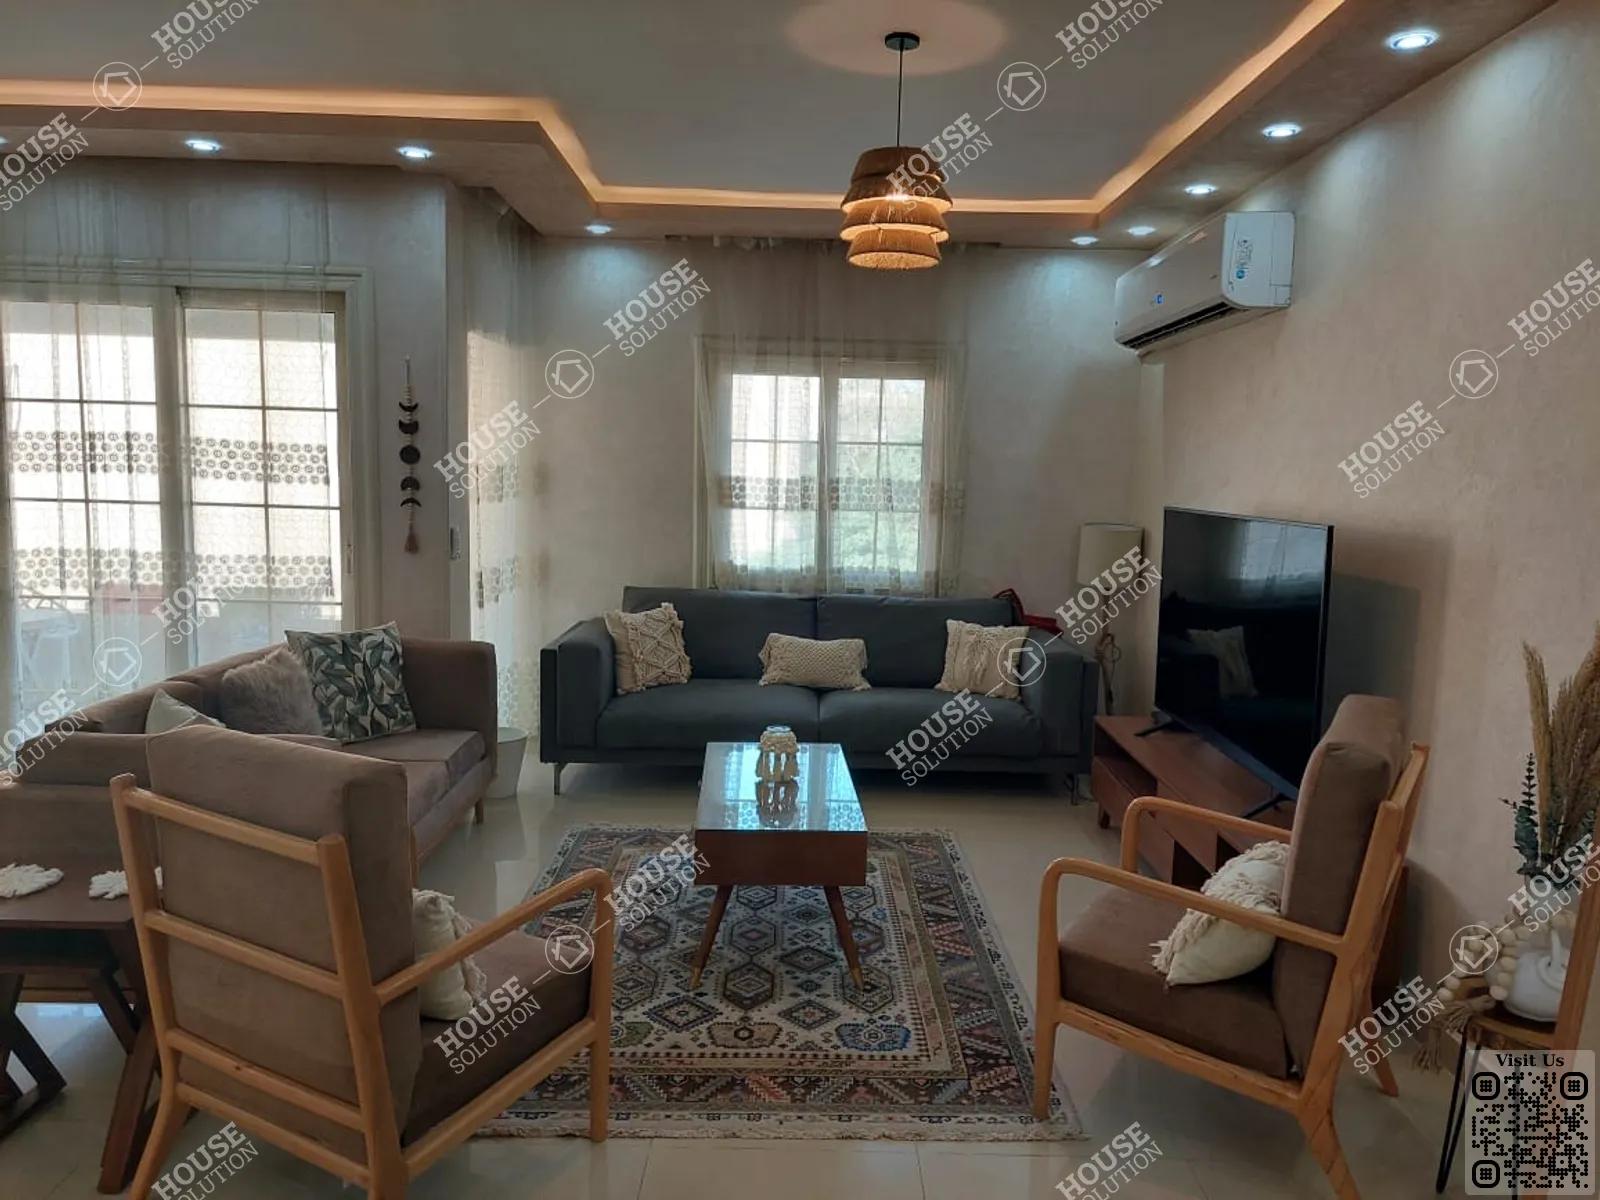 RECEPTION  @ Apartments For Rent In Maadi Maadi Degla Area: 185 m² consists of 3 Bedrooms 2 Bathrooms Modern furnished 5 stars #5500-0